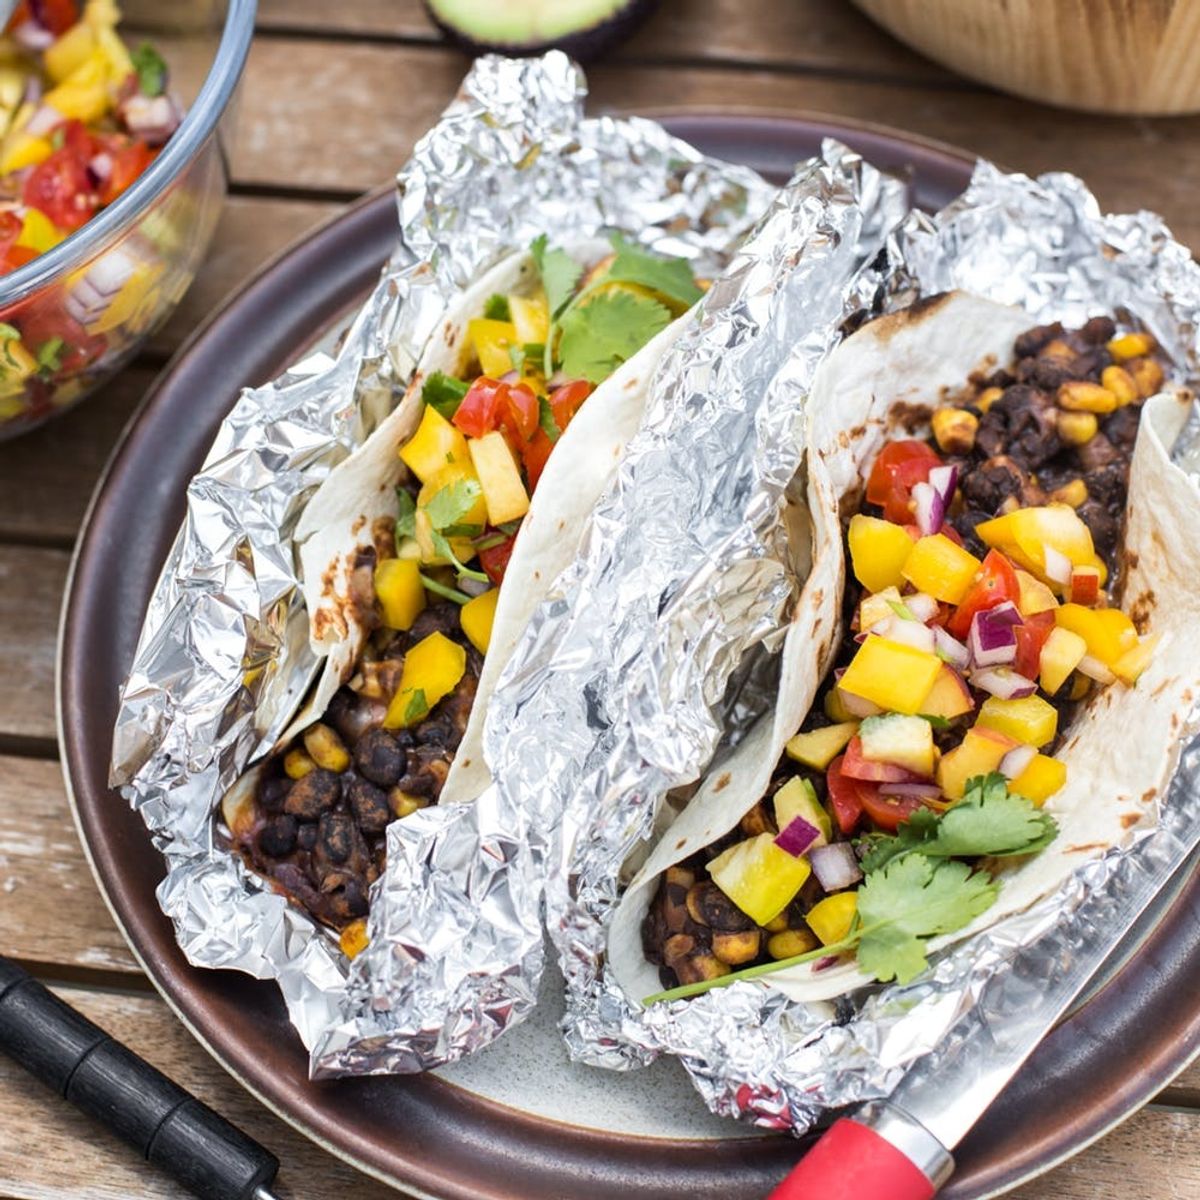 Fed Up of Burgers and Hot Dogs? These BBQ Tacos Will Be Your New Favorite Camping Hack!